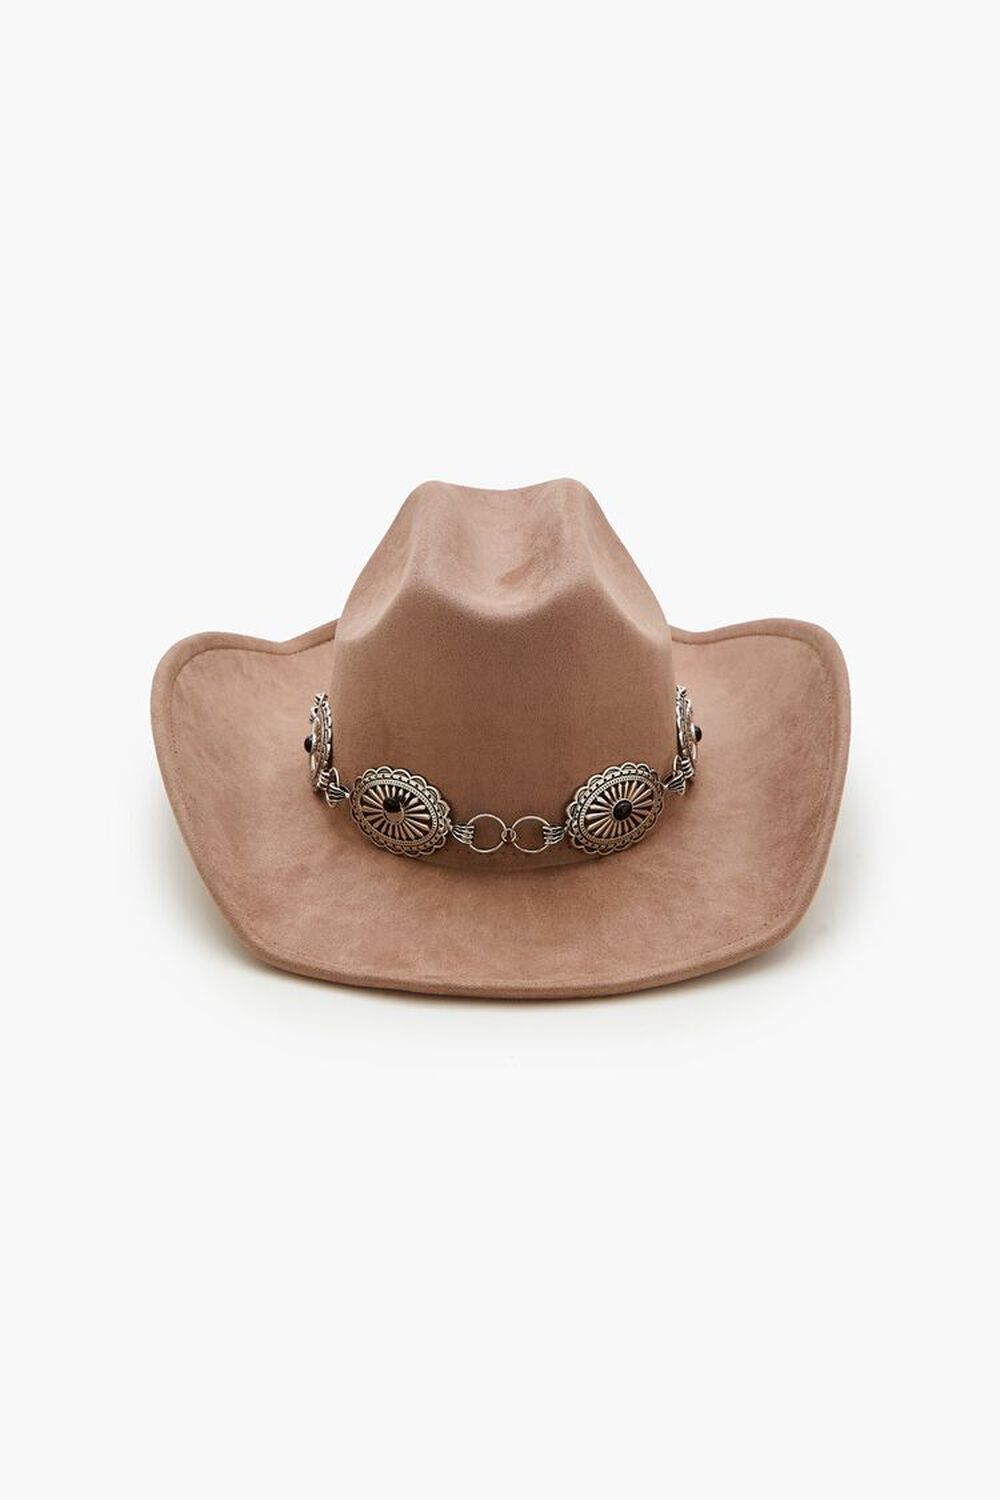 TAUPE/SILVER Faux Stone Chain Cowboy Hat, image 1